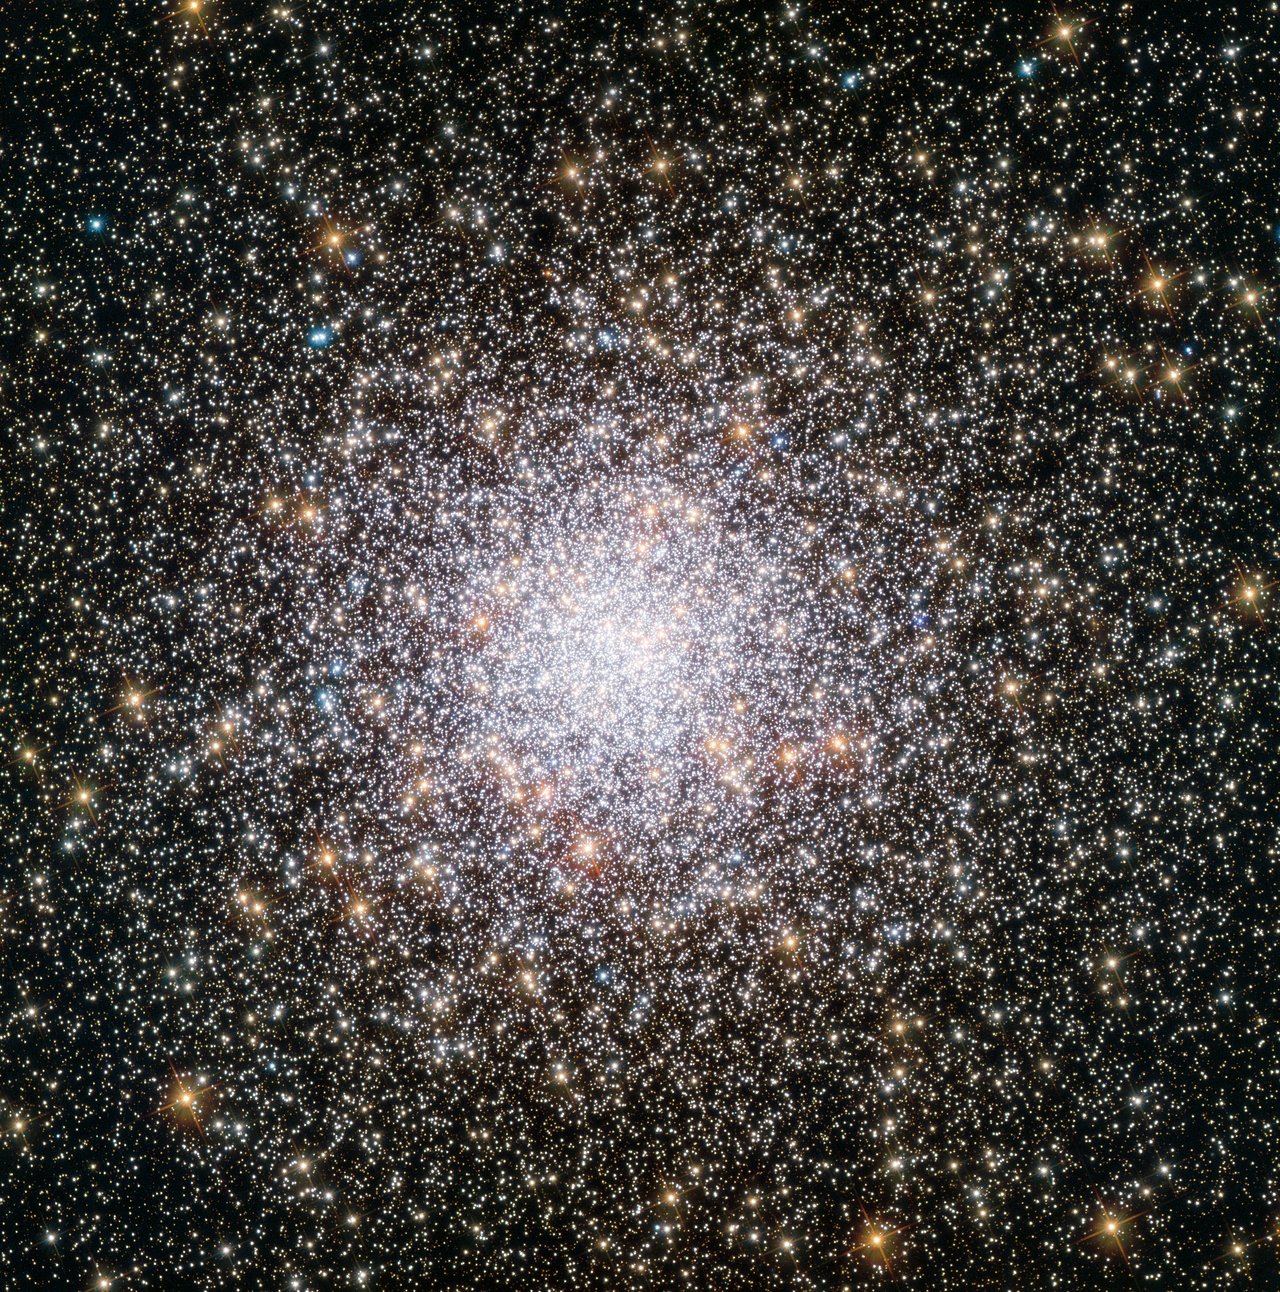   Globular clusters offer some of the most spectacular sights in the night sky. These ornate spheres contain hundreds of thousands of stars, and reside in the outskirts of galaxies. The Milky Way contains over 150 such clusters - and the one shown in this NASA/ESA Hubble Space Telescope image, named NGC 362, is one of the more unusual ones. As stars make their way through life they fuse elements together in their cores, creating heavier and heavier elements - known in astronomy as metals - in the process. When these stars die, they flood their surroundings with the material they have formed during their lifetimes, enriching the interstellar medium with metals. Stars that form later therefore contain higher proportions of metals than their older relatives. By studying the different elements present within individual stars in NGC 362, astronomers discovered that the cluster boasts a surprisingly high metal content, indicating that it is younger than expected. Although most globular clusters are much older than the majority of stars in their host galaxy, NGC 362 bucks the trend, with an age lying between 10 and 11 billion years old. For reference, the age of the Milky Way is estimated to be above 13 billion years. This image, in which you can view NGC 362's individual stars, was taken by Hubble's Advanced Camera for Surveys (ACS).